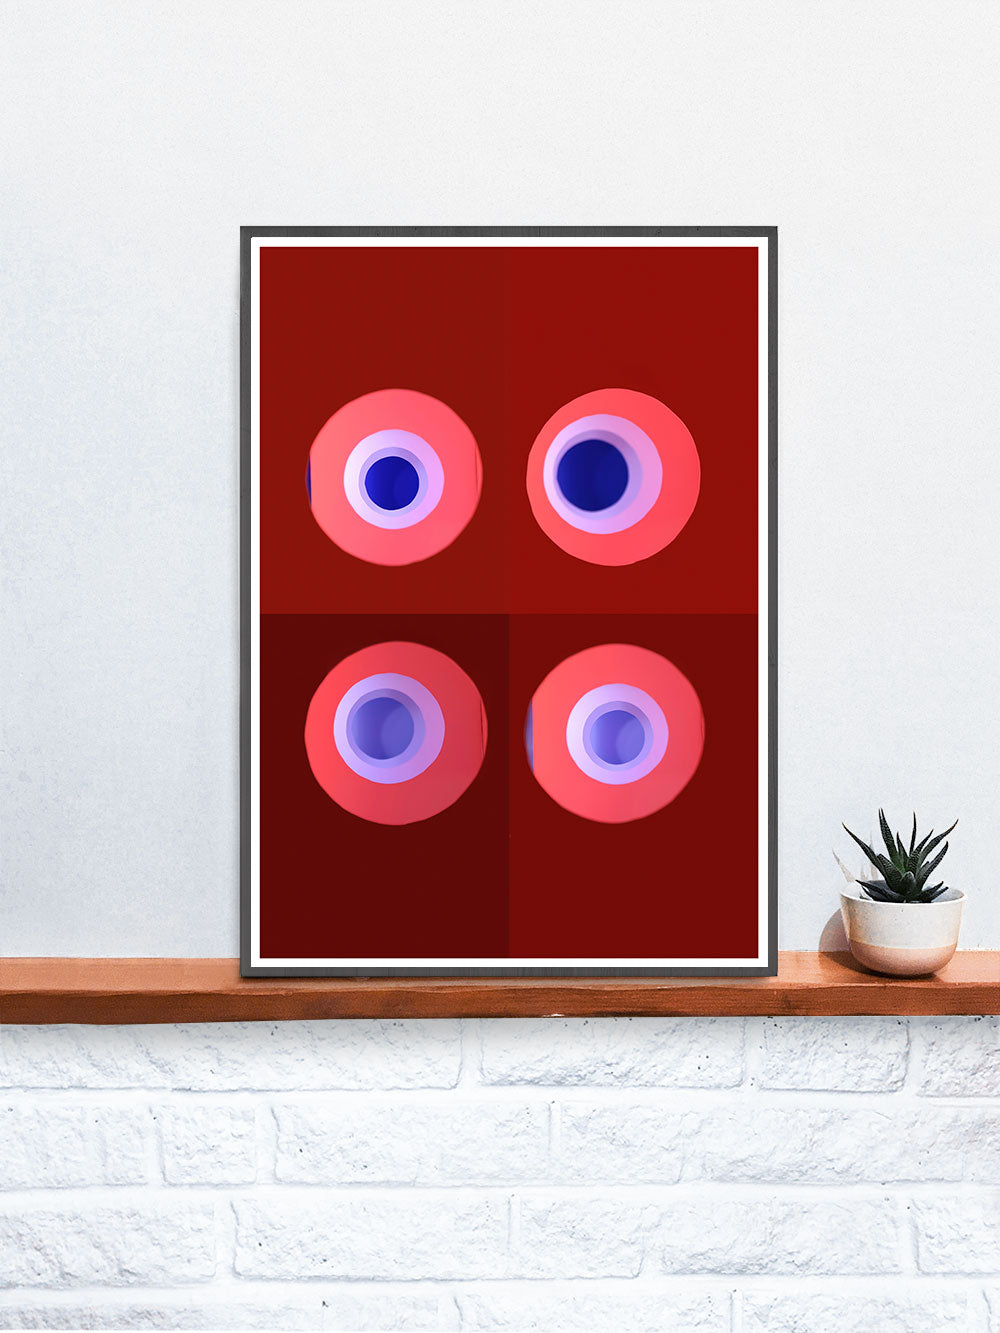 Red and Blue Minimal Art Print in a frame on a shelf